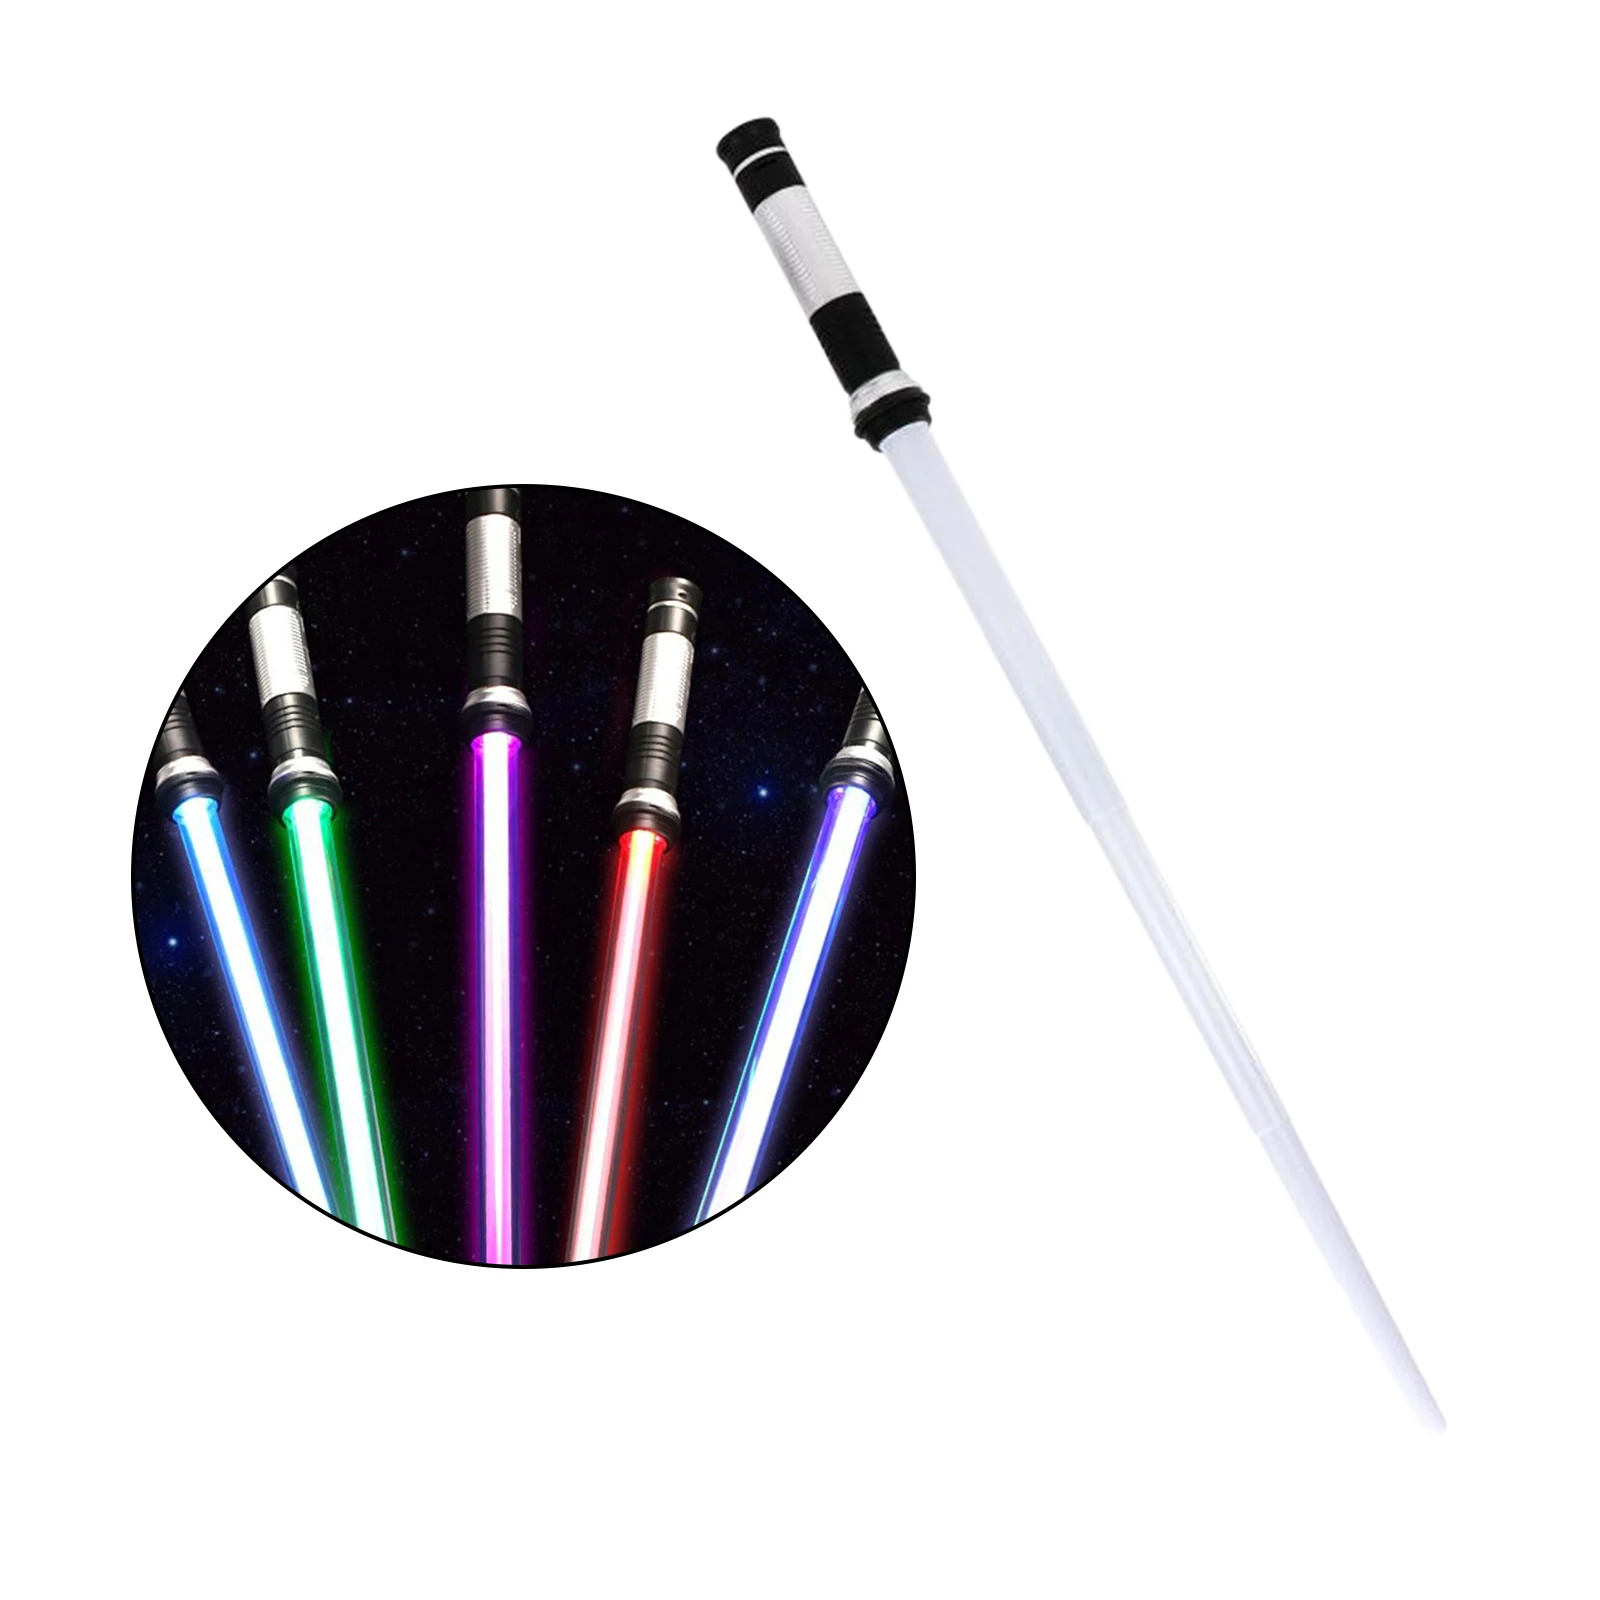 Flashing Lightsaber LED Light Up Sword War Toy 7 colors Changing w/ Sound Gifts